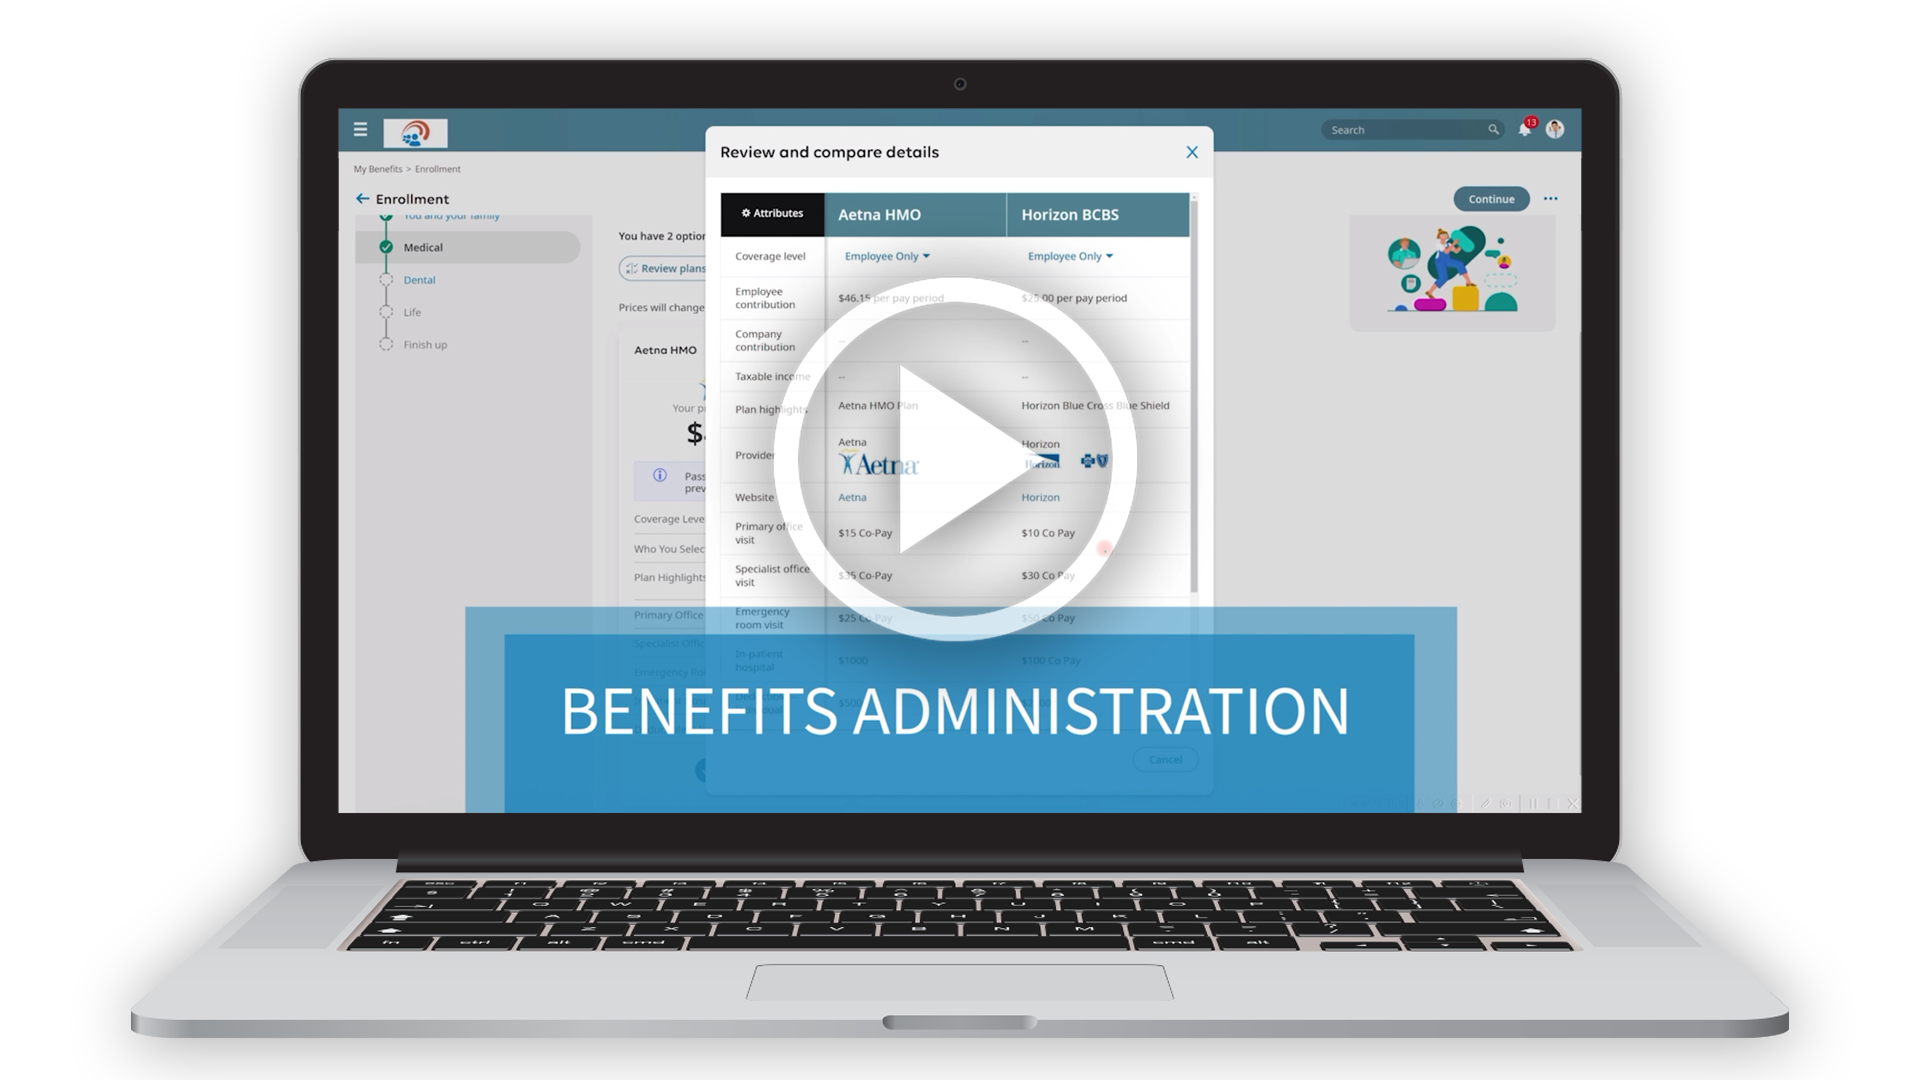 Cloud Based Benefits Administration Software Demo